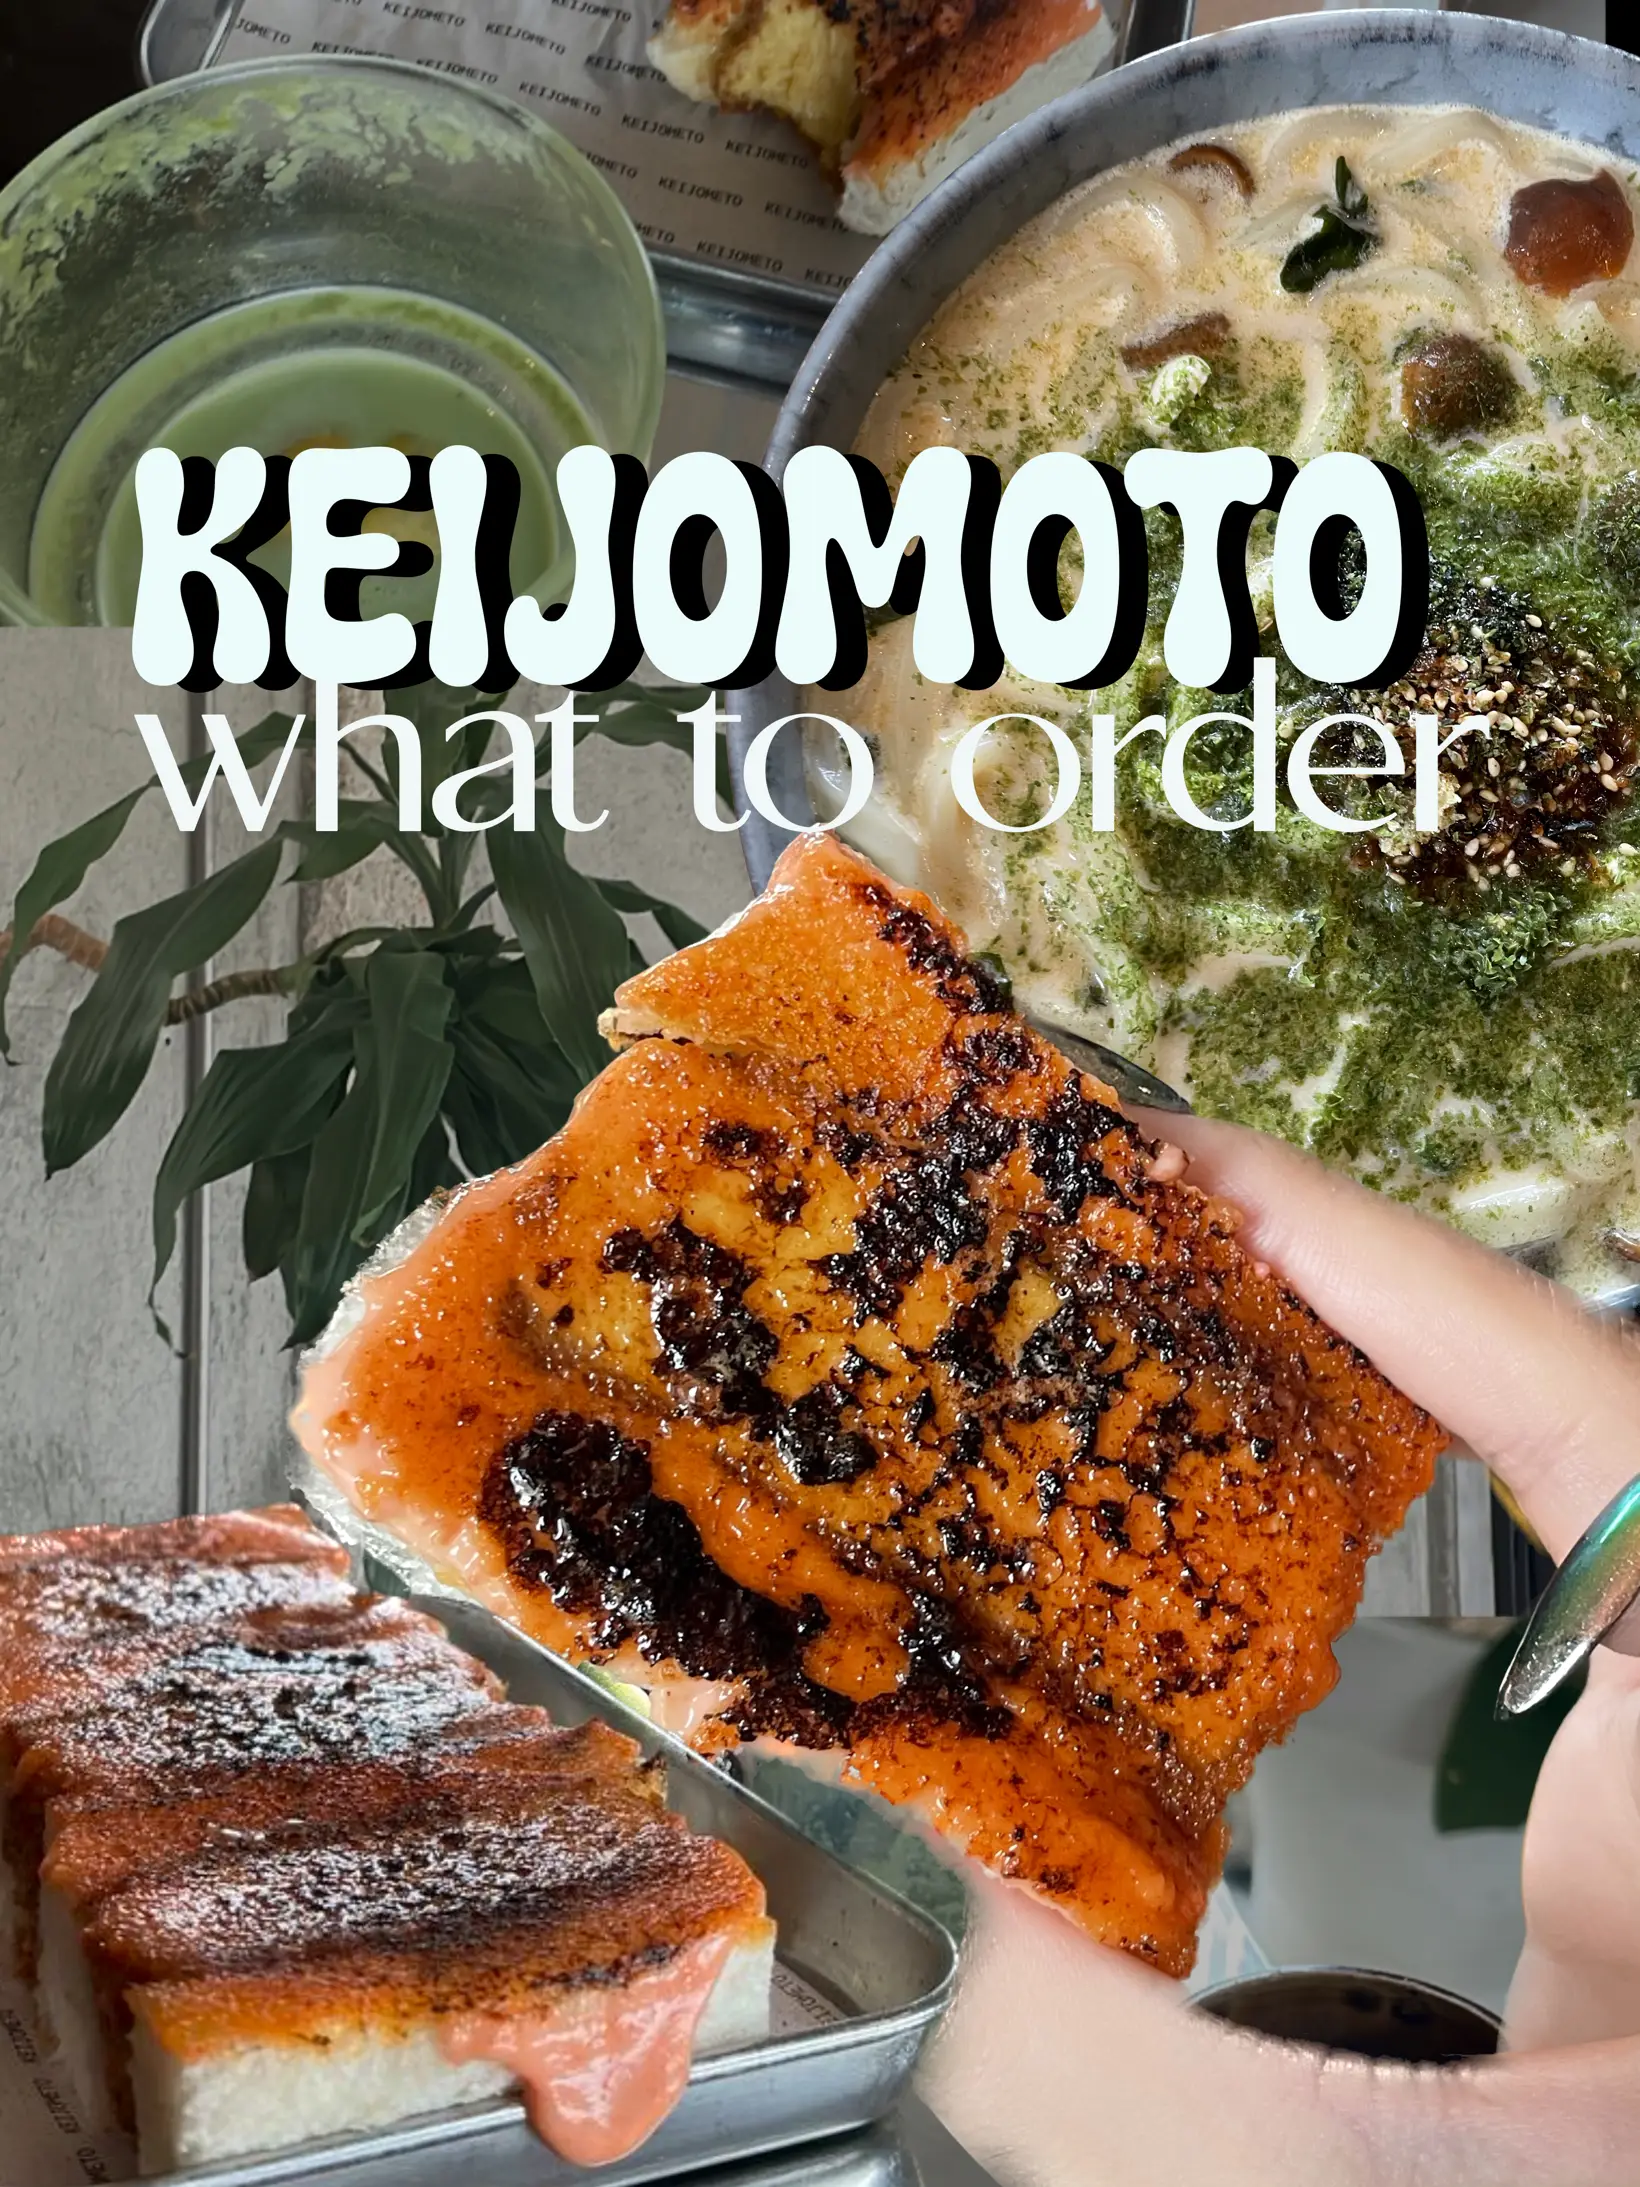 KEIJOMOTO: What to Order?'s images